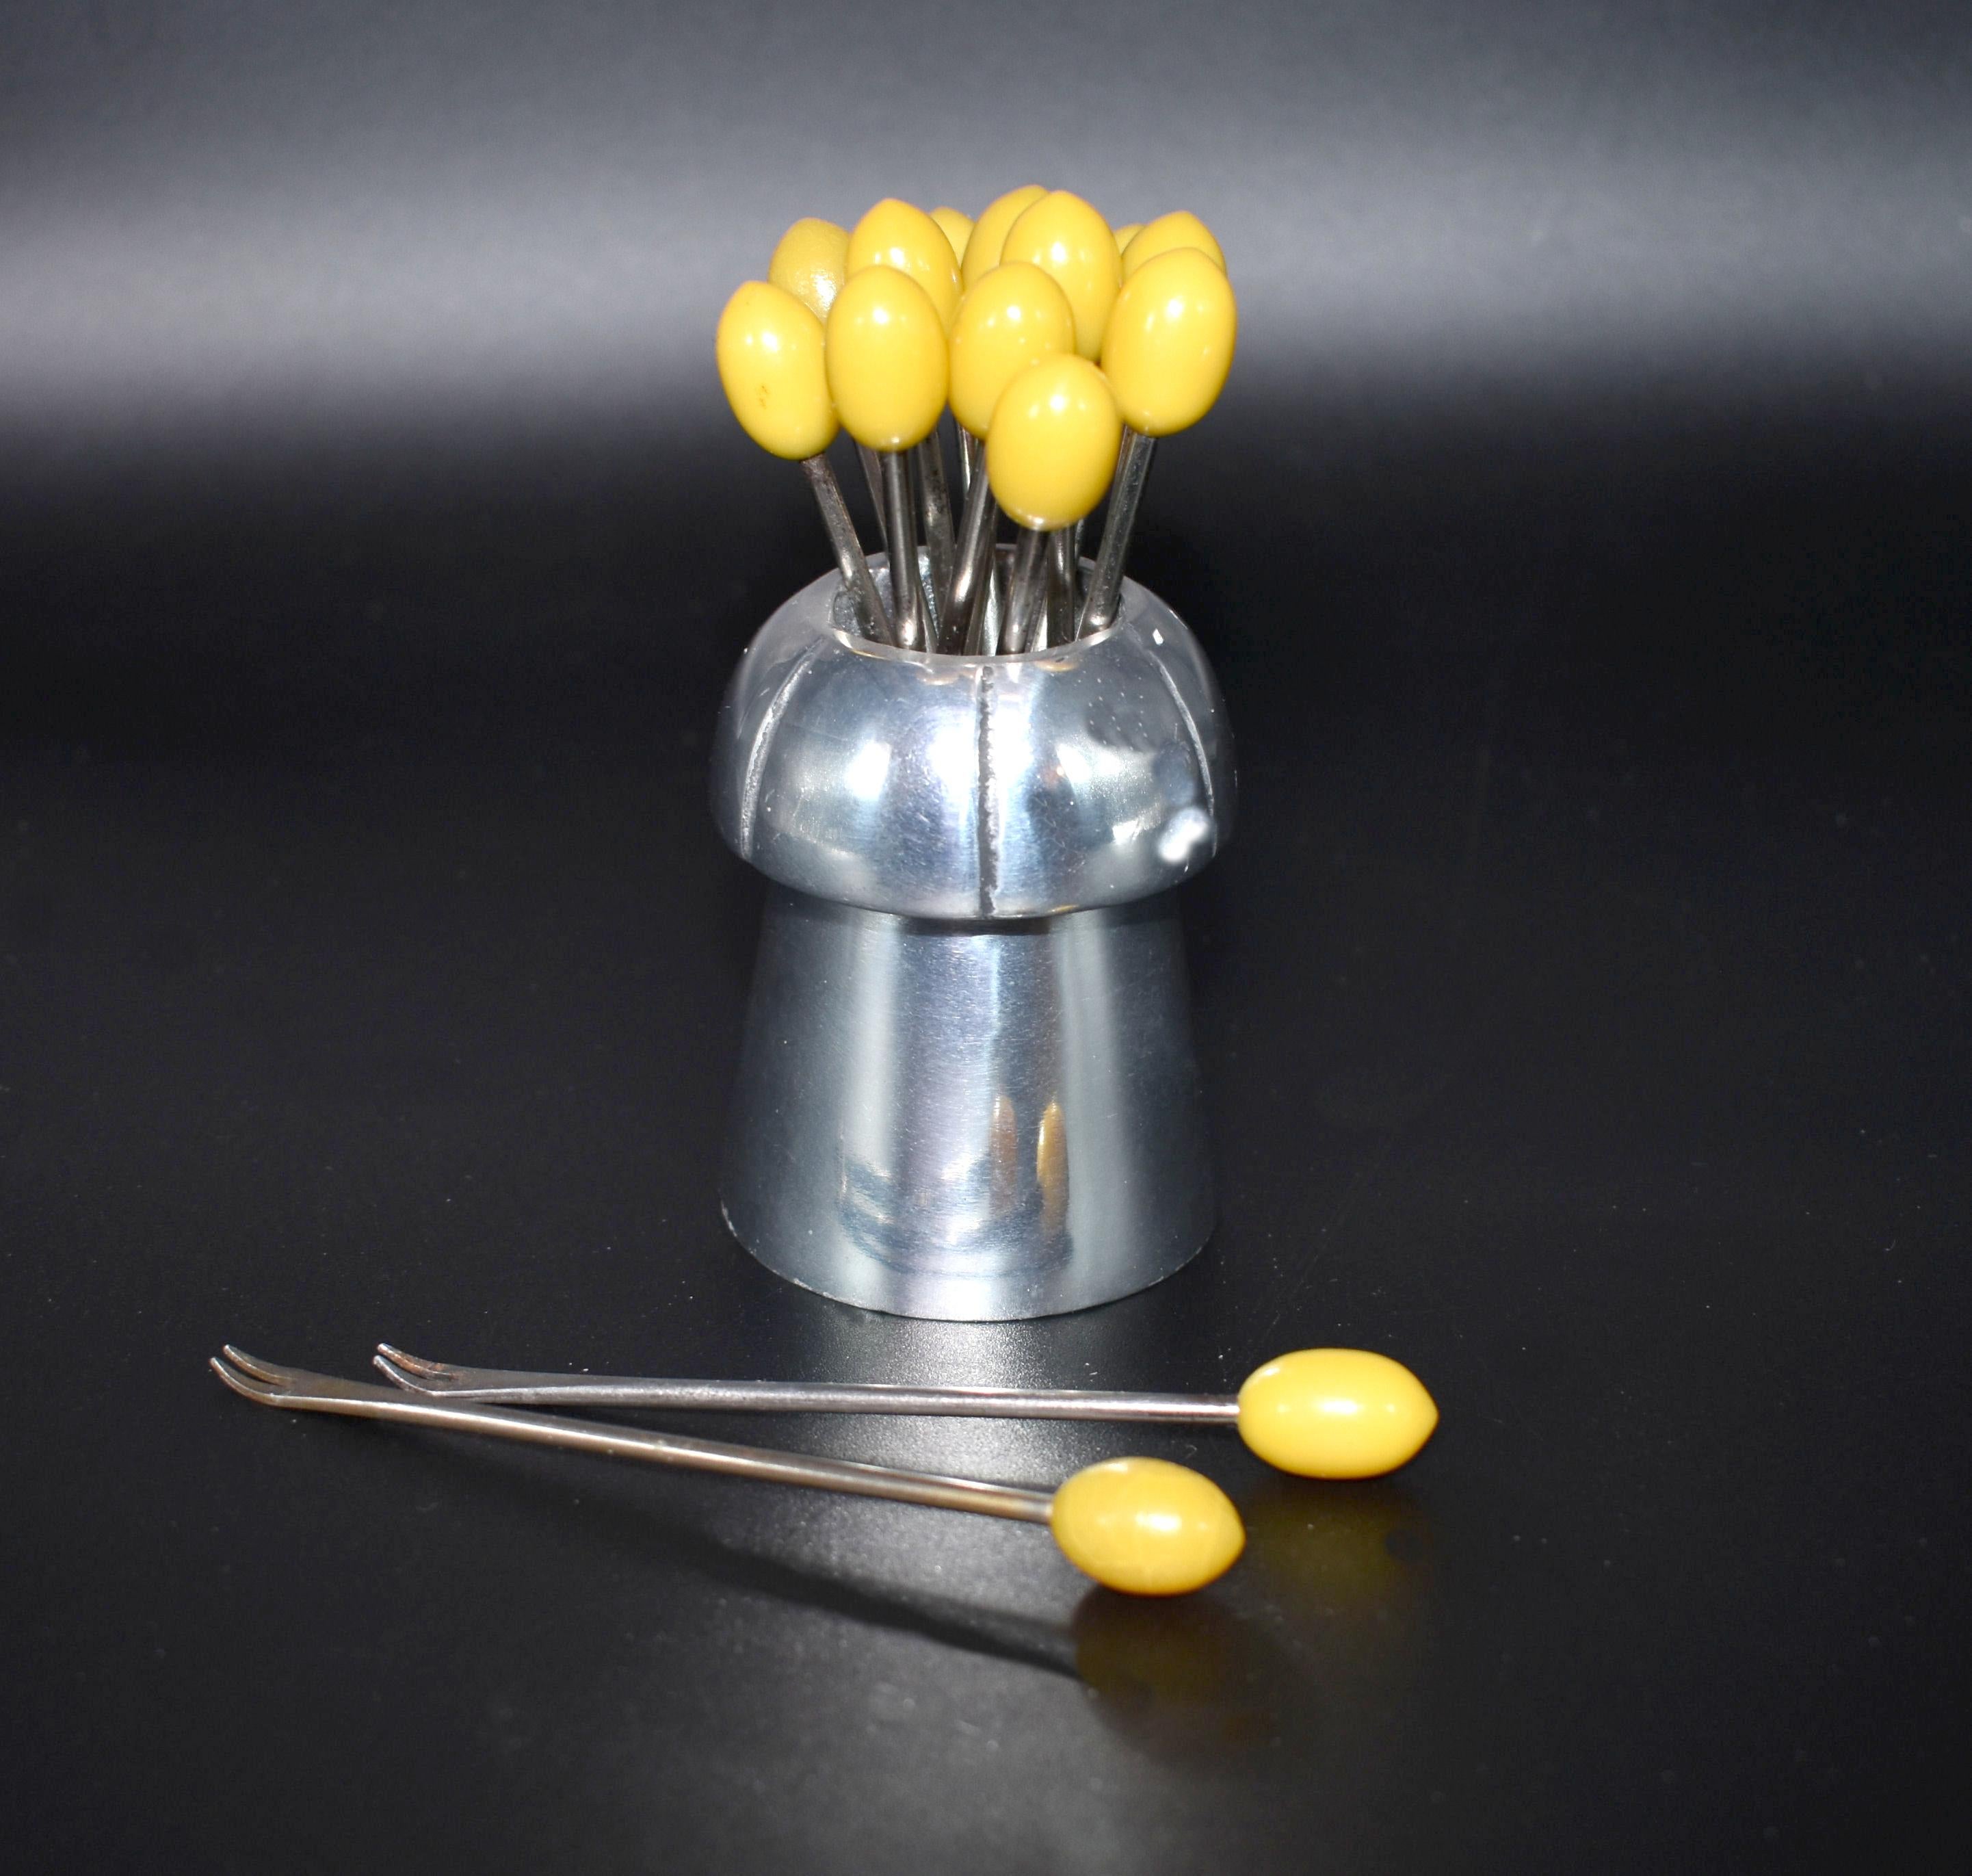 A novelty 1930s cocktail stick set originating from France. Features yellow coloured Bakelite cocktail sticks with chromed metal prongs inside a chrome pot container. Great set in very good condition, minimal signs of age, quite a rare shape.